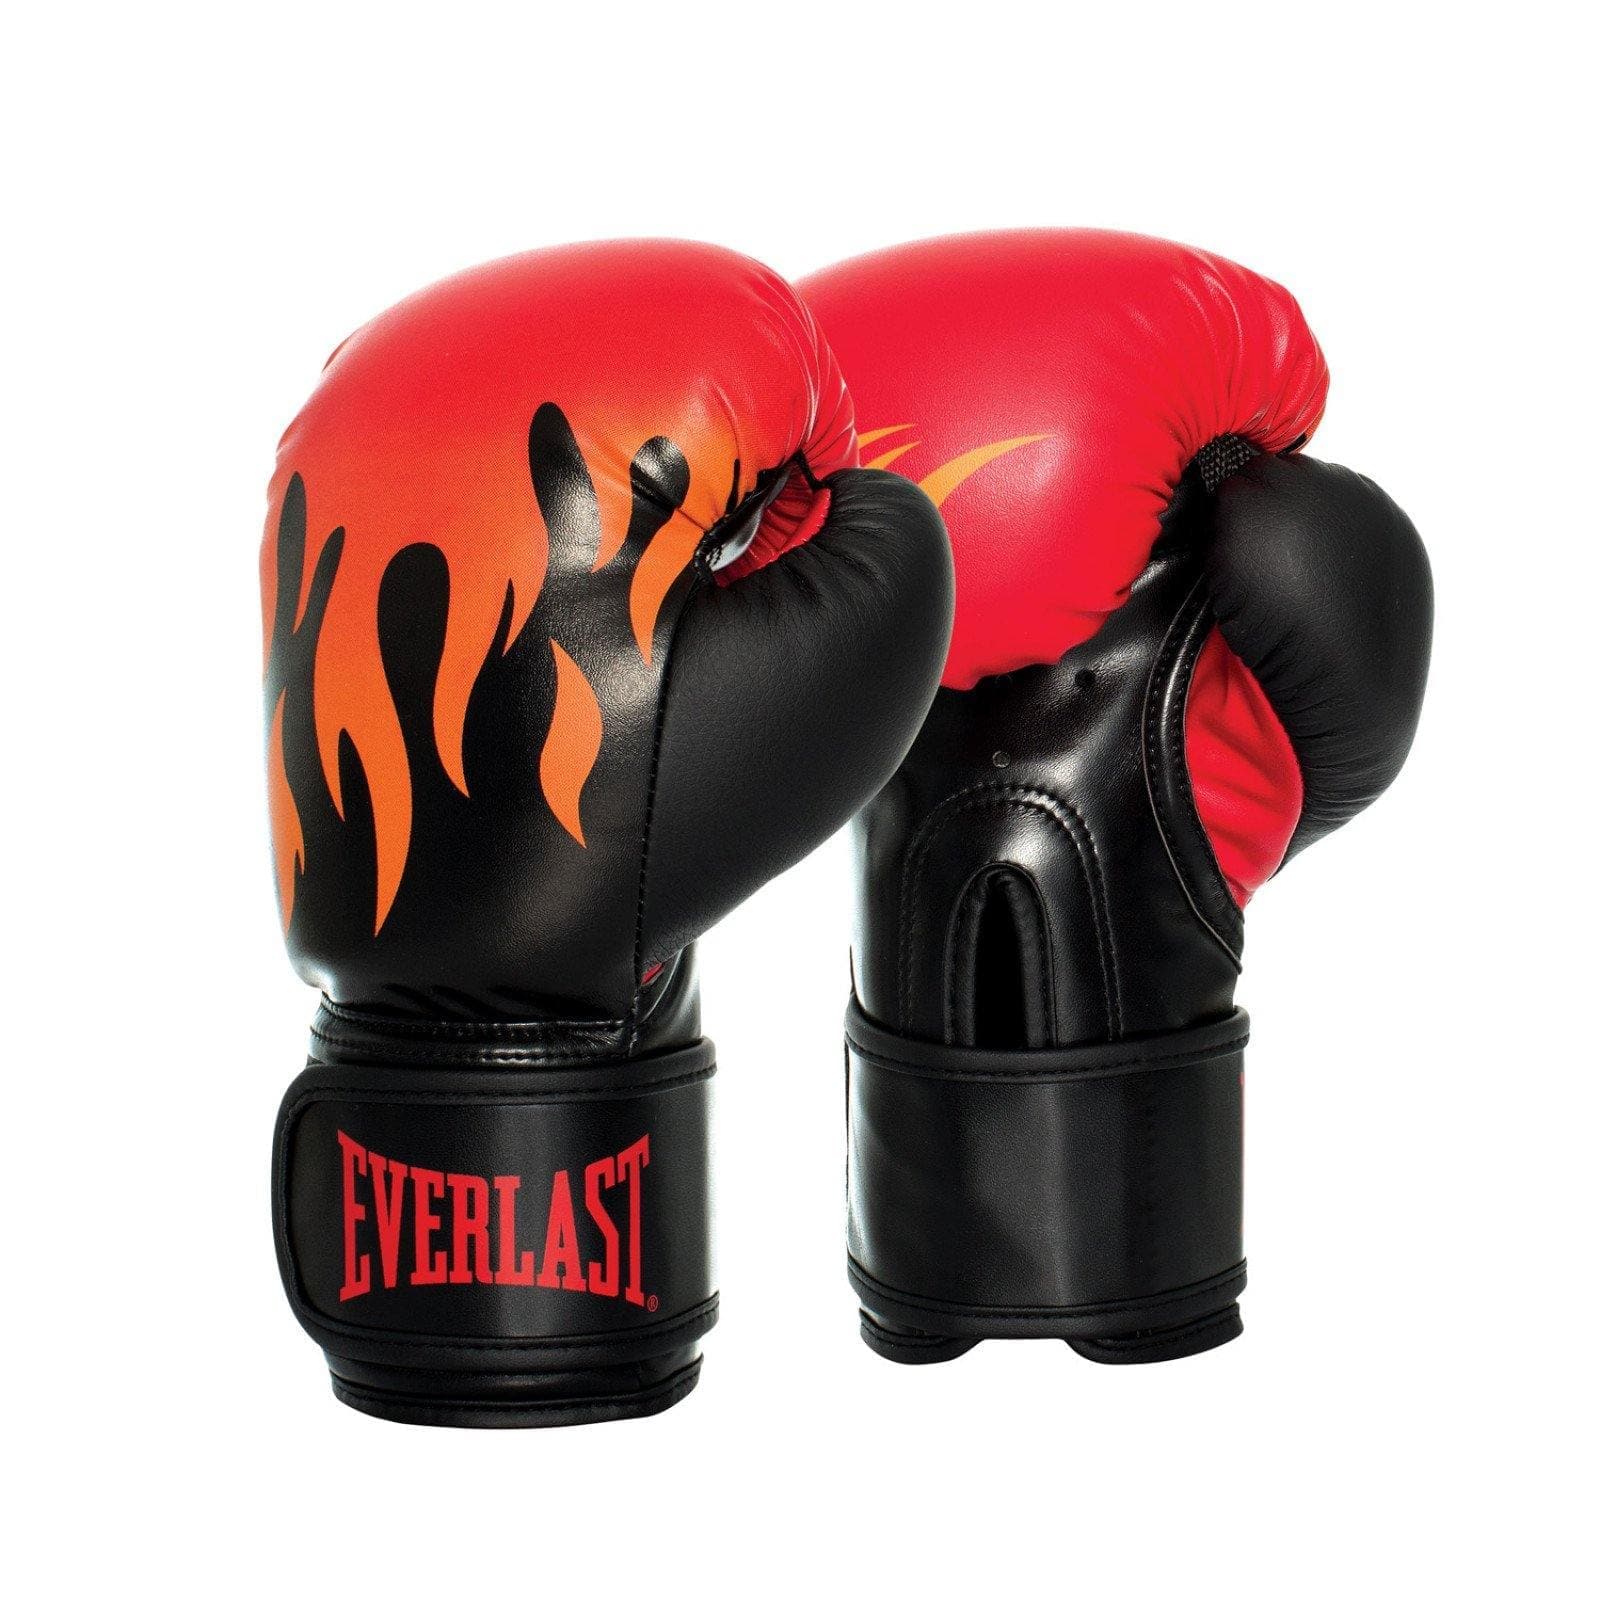 SPECIAL - JUNIOR BOXING PACK